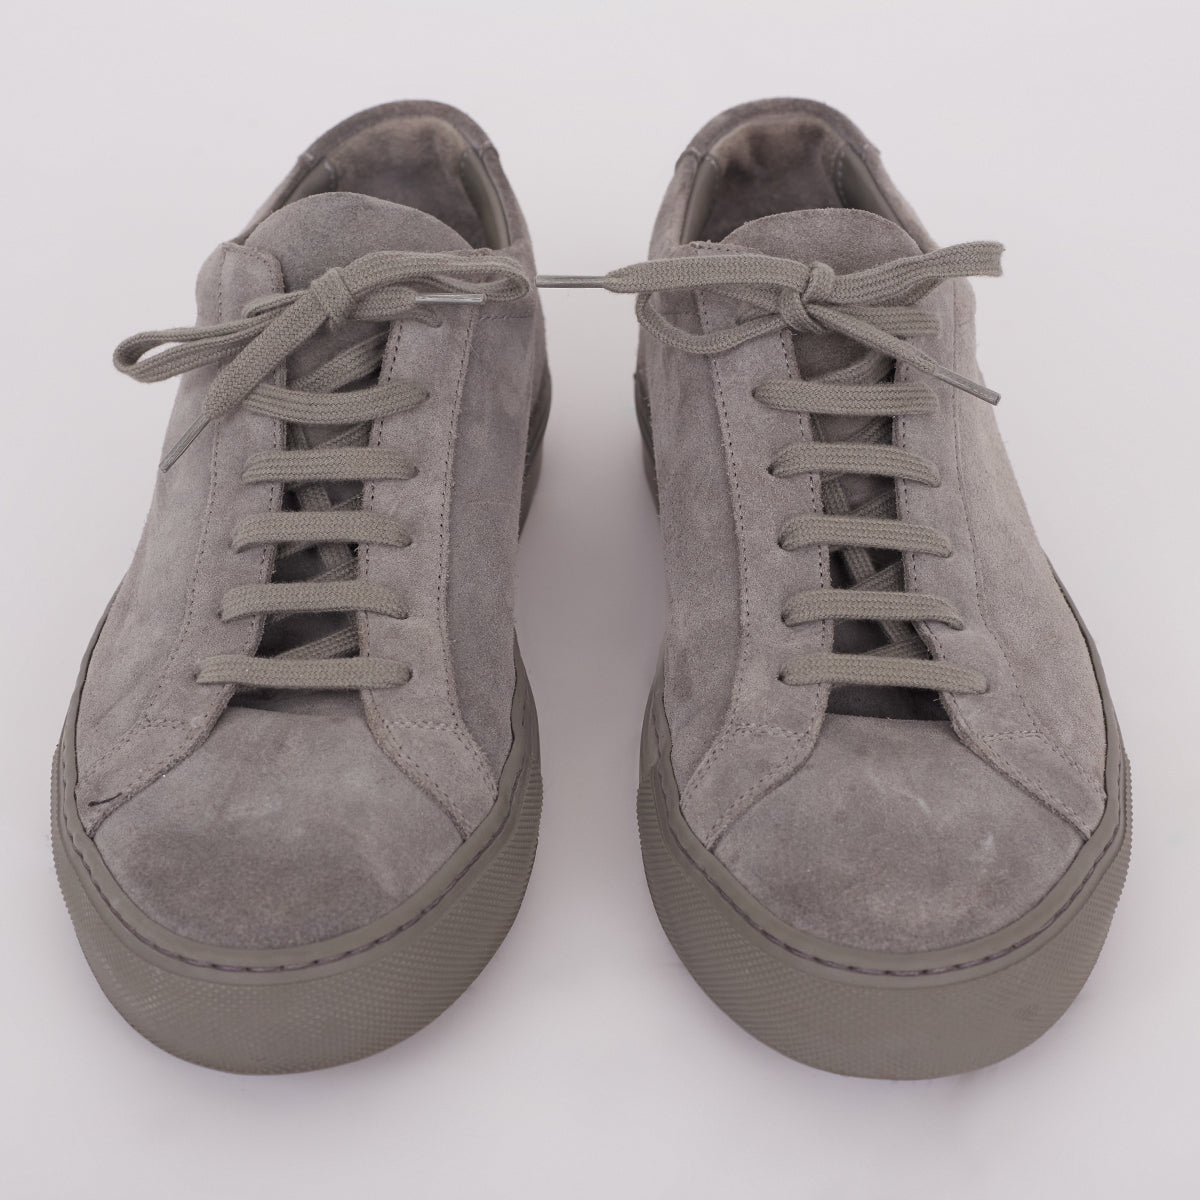 Tenis Cinza Common Projects Tam. 40 Br